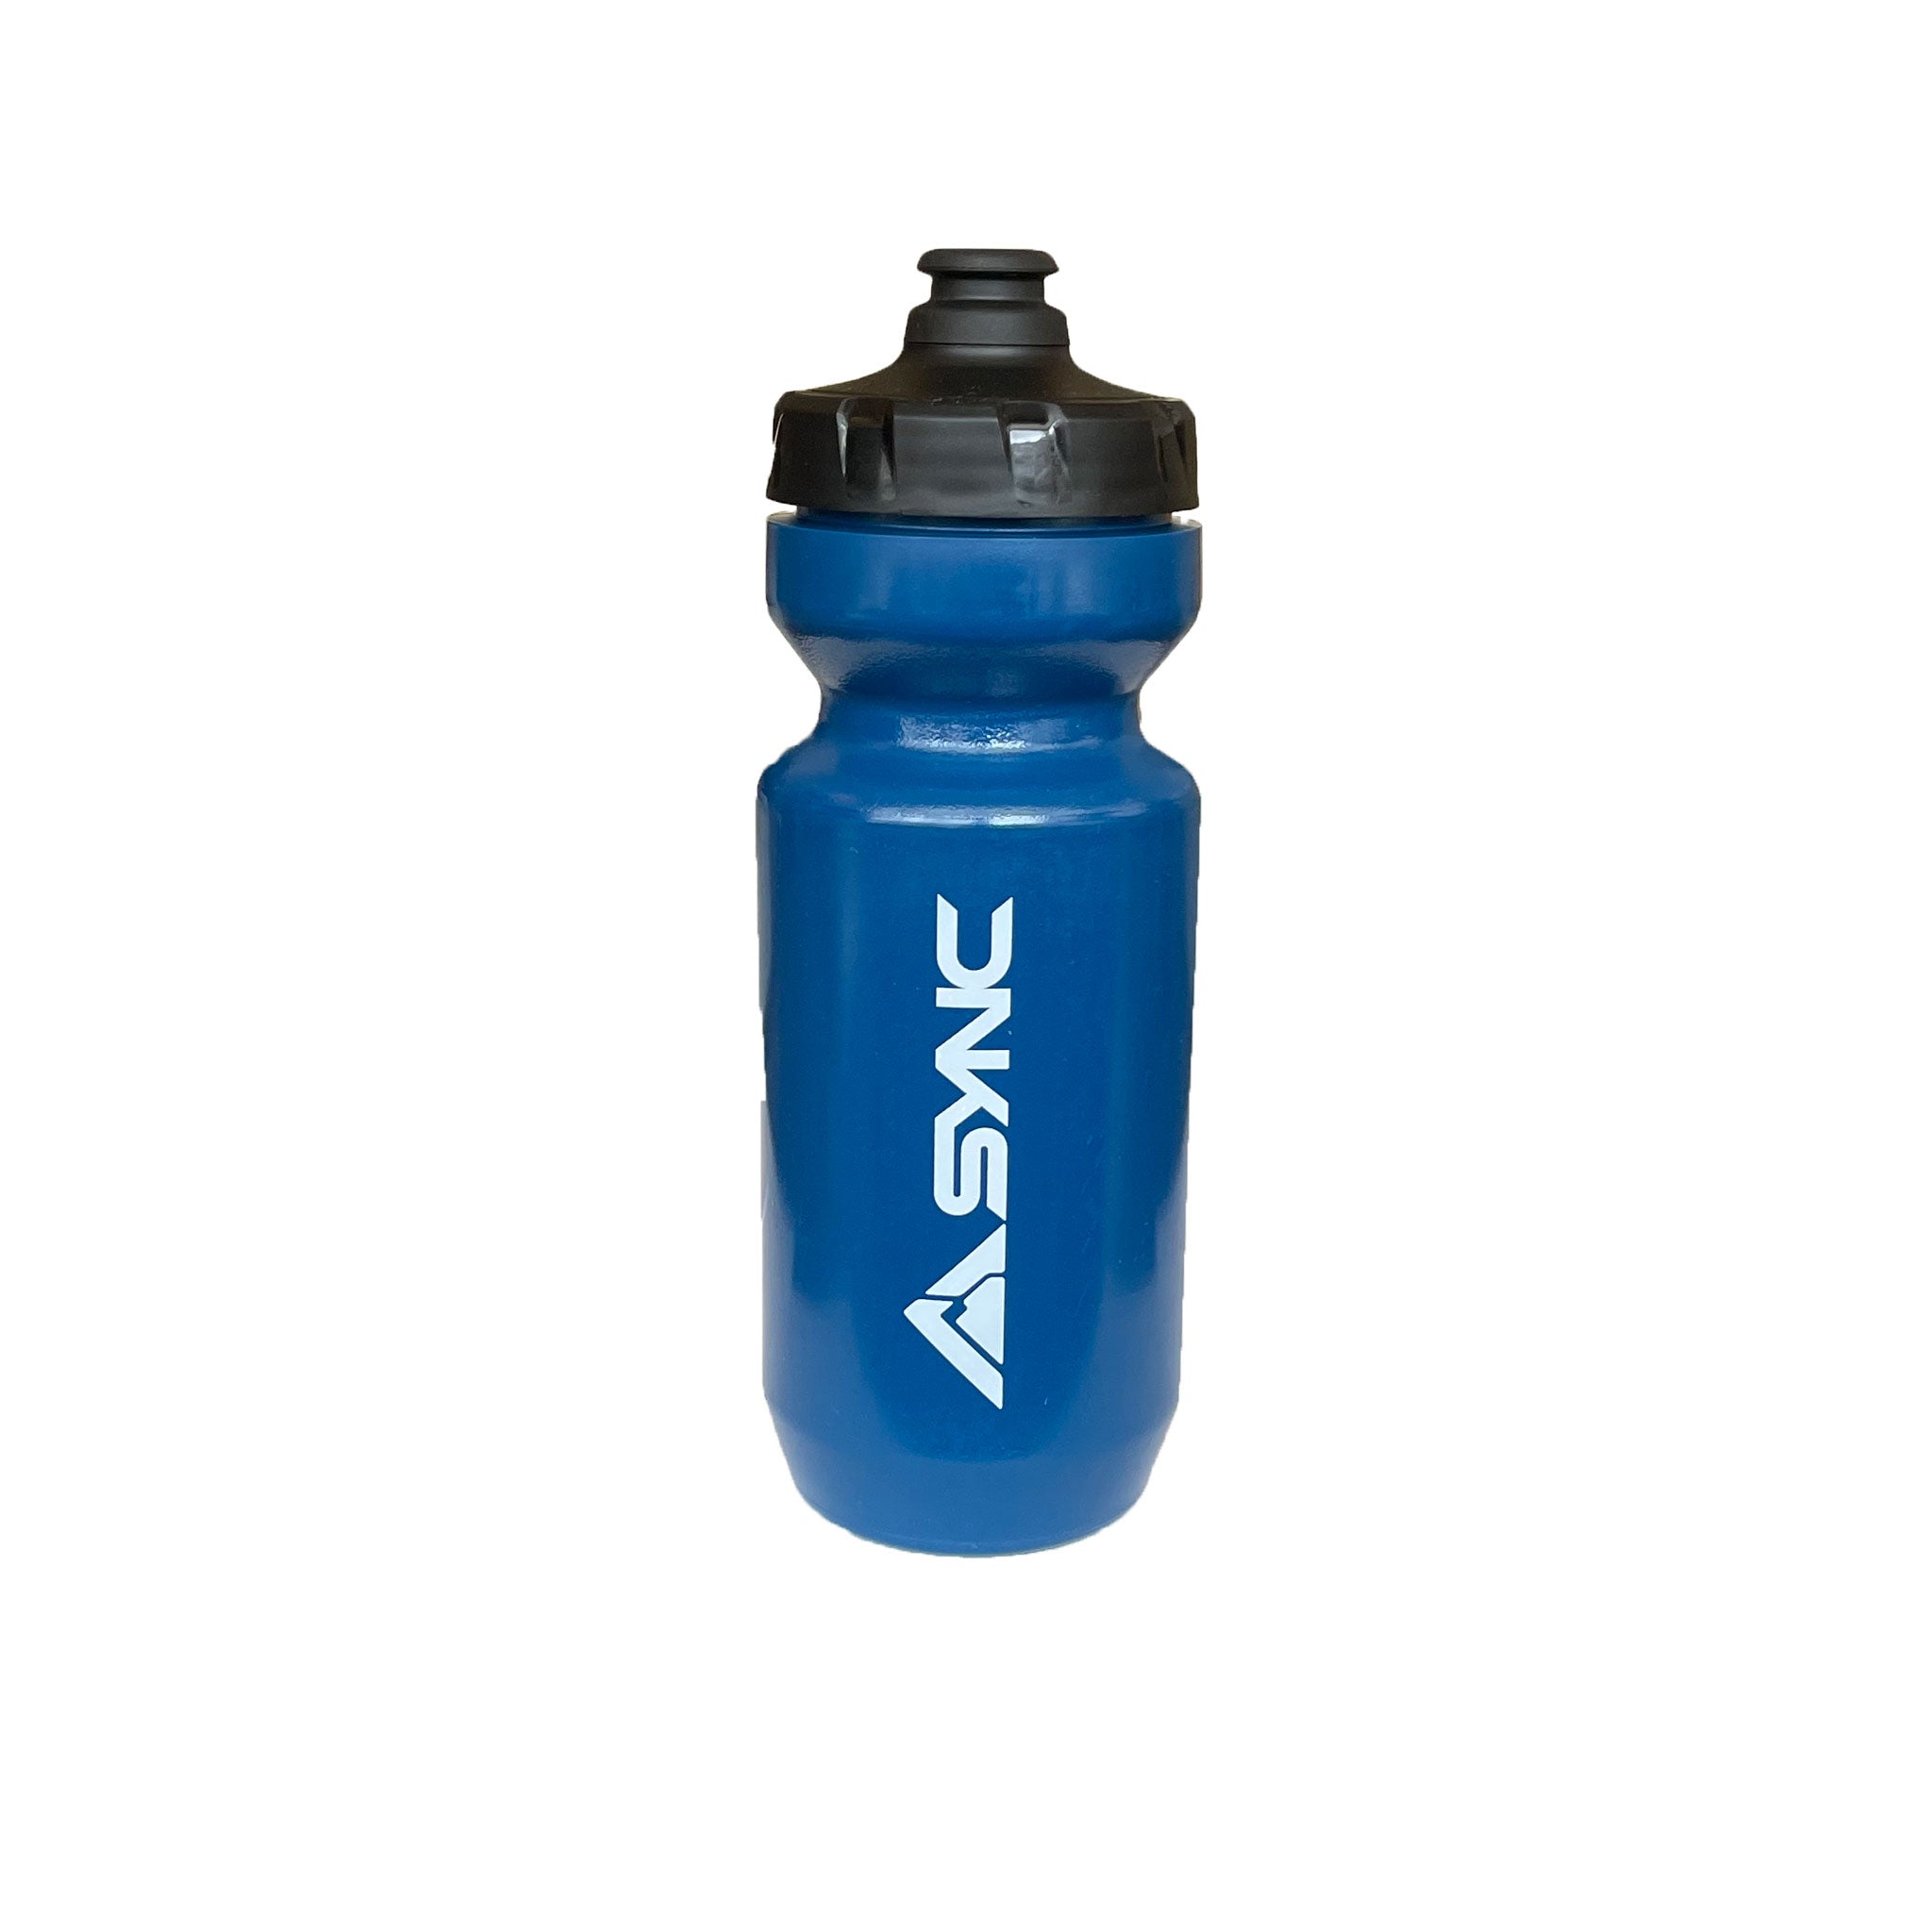 21 oz. Water Bottle, Stay Hydrated While Outdoors